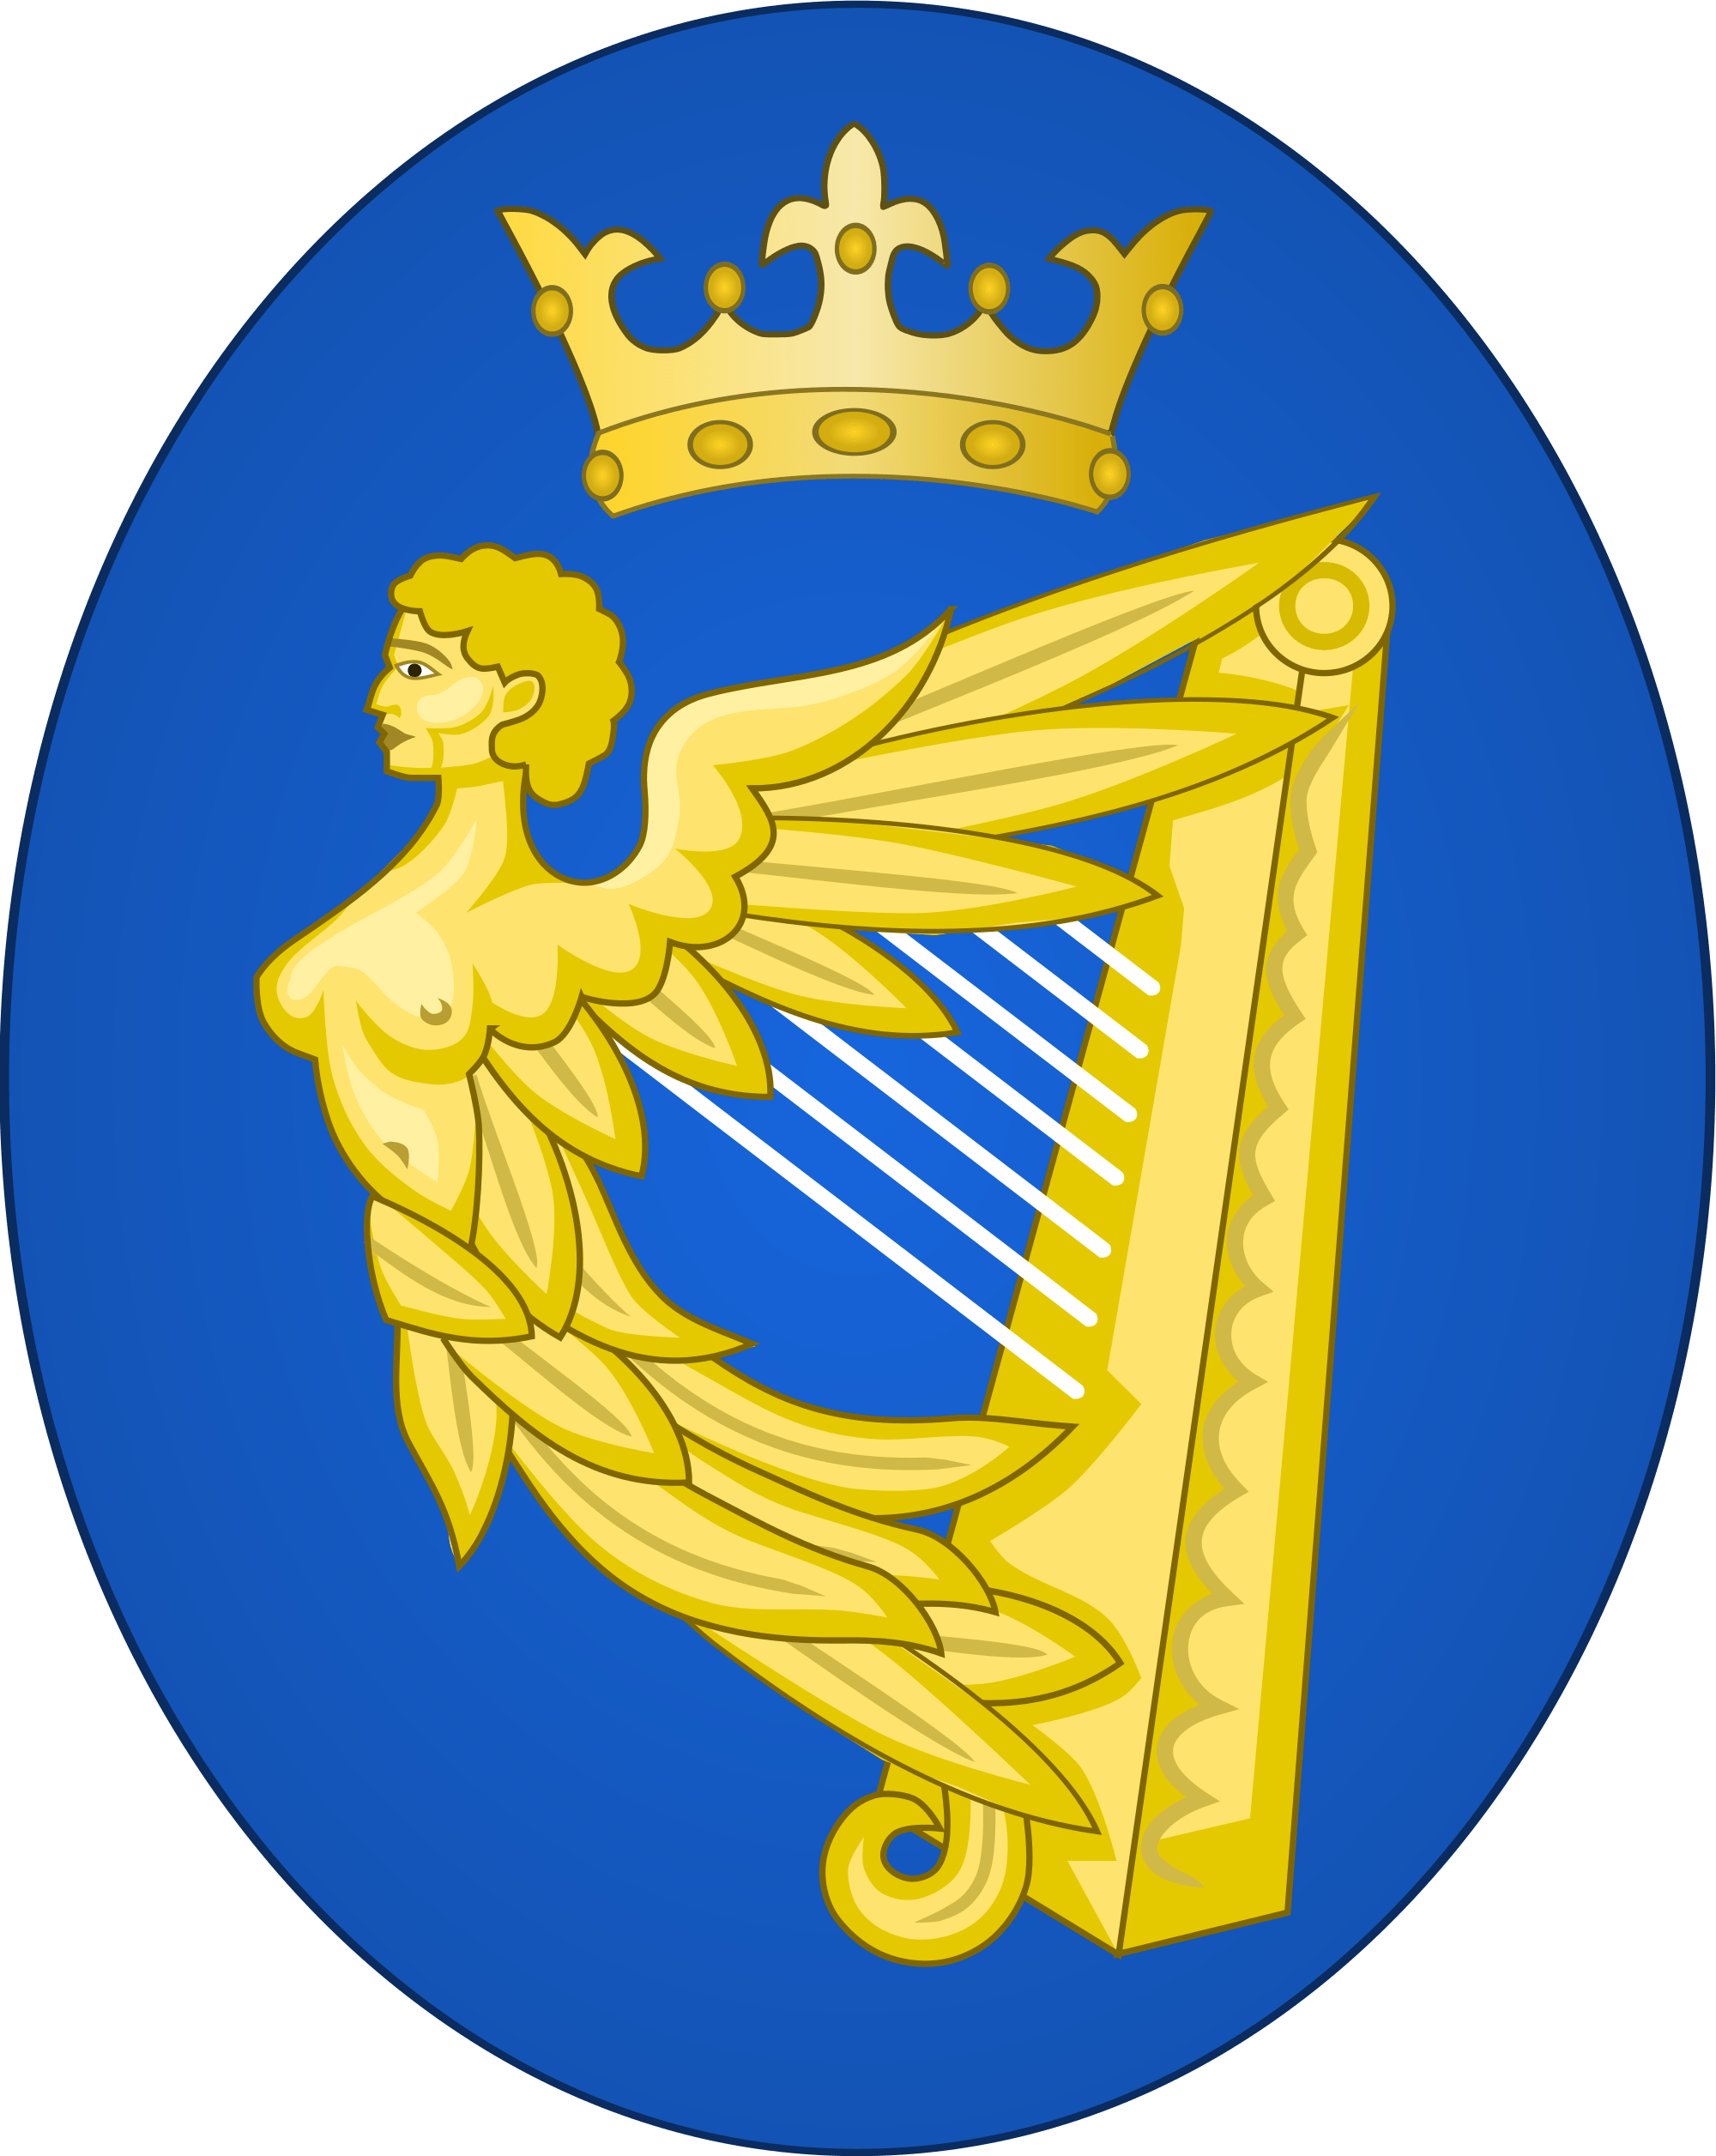 Blue Square with a Gold Harp Logo - Coat of arms of Ireland